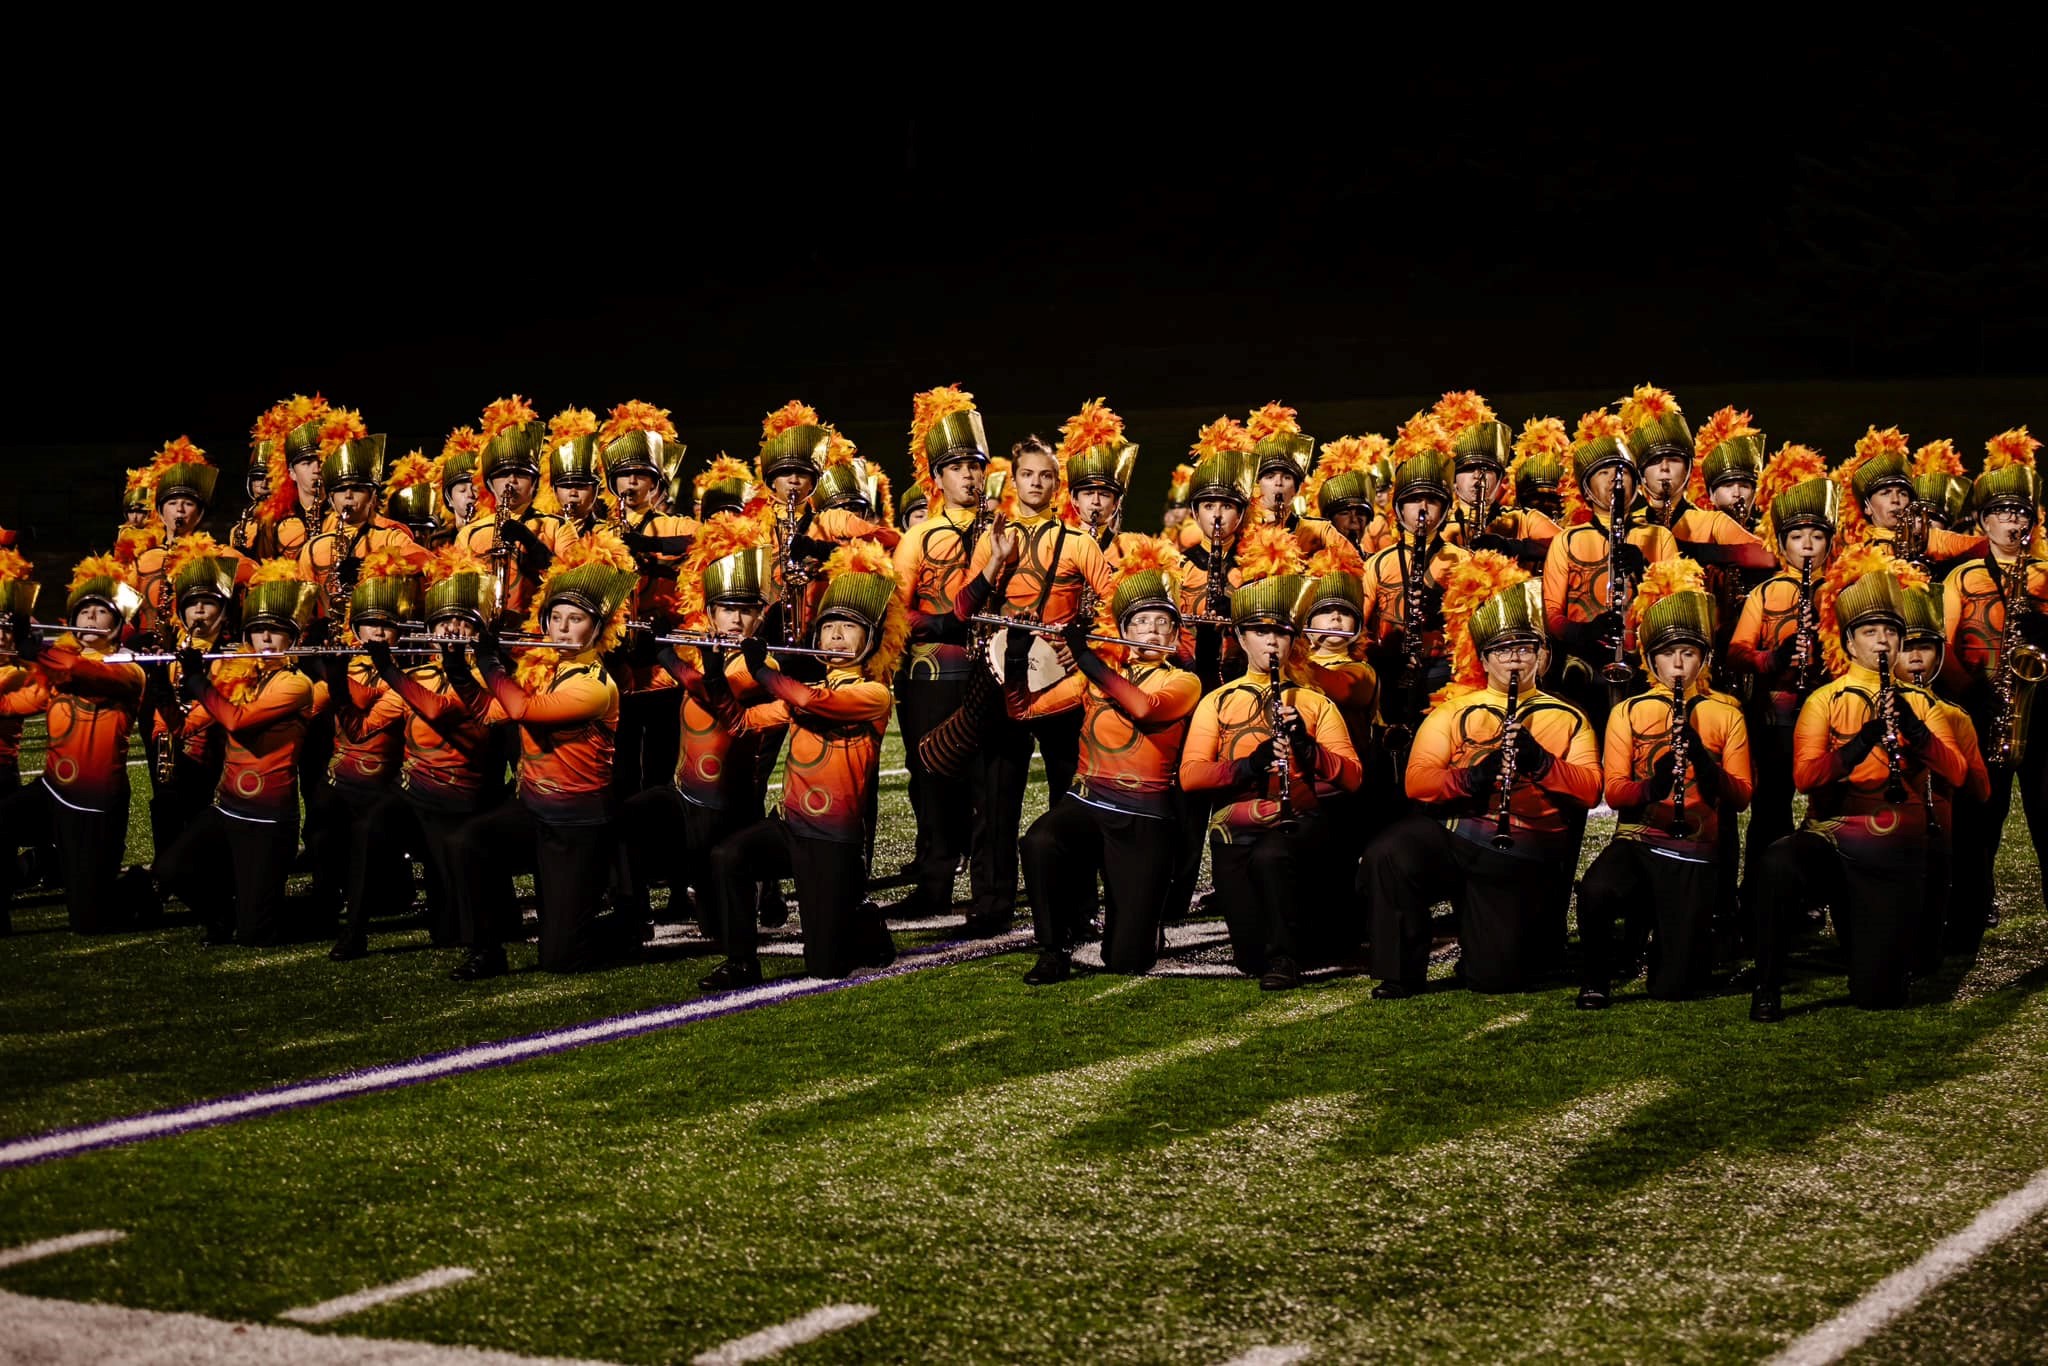 a marching band dressed in orange uniforms